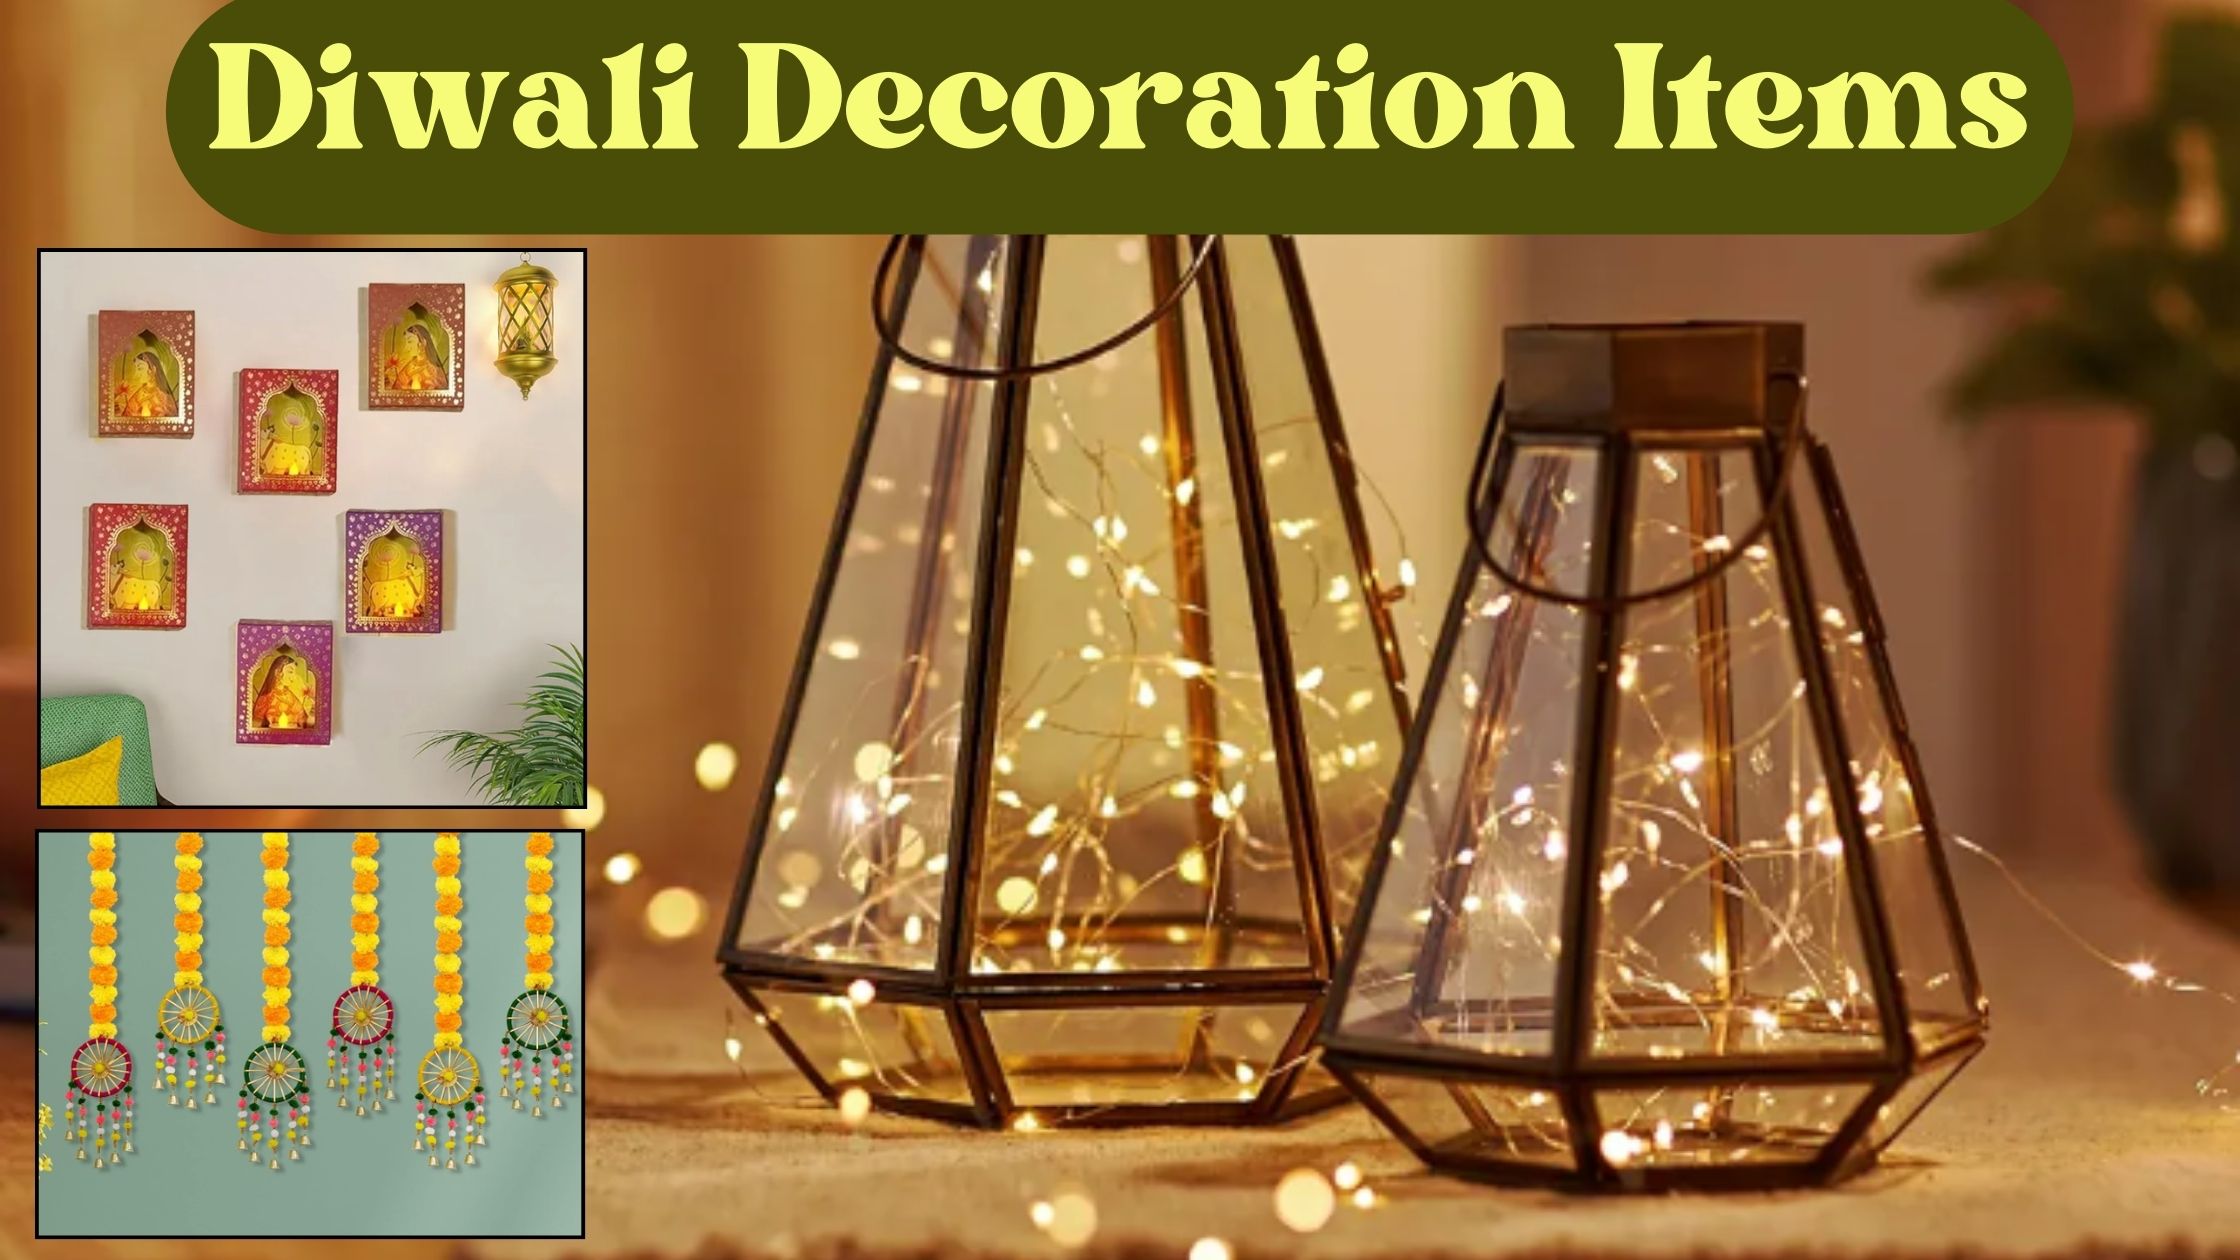 Best Diwali Home Decoration Products From Amazon